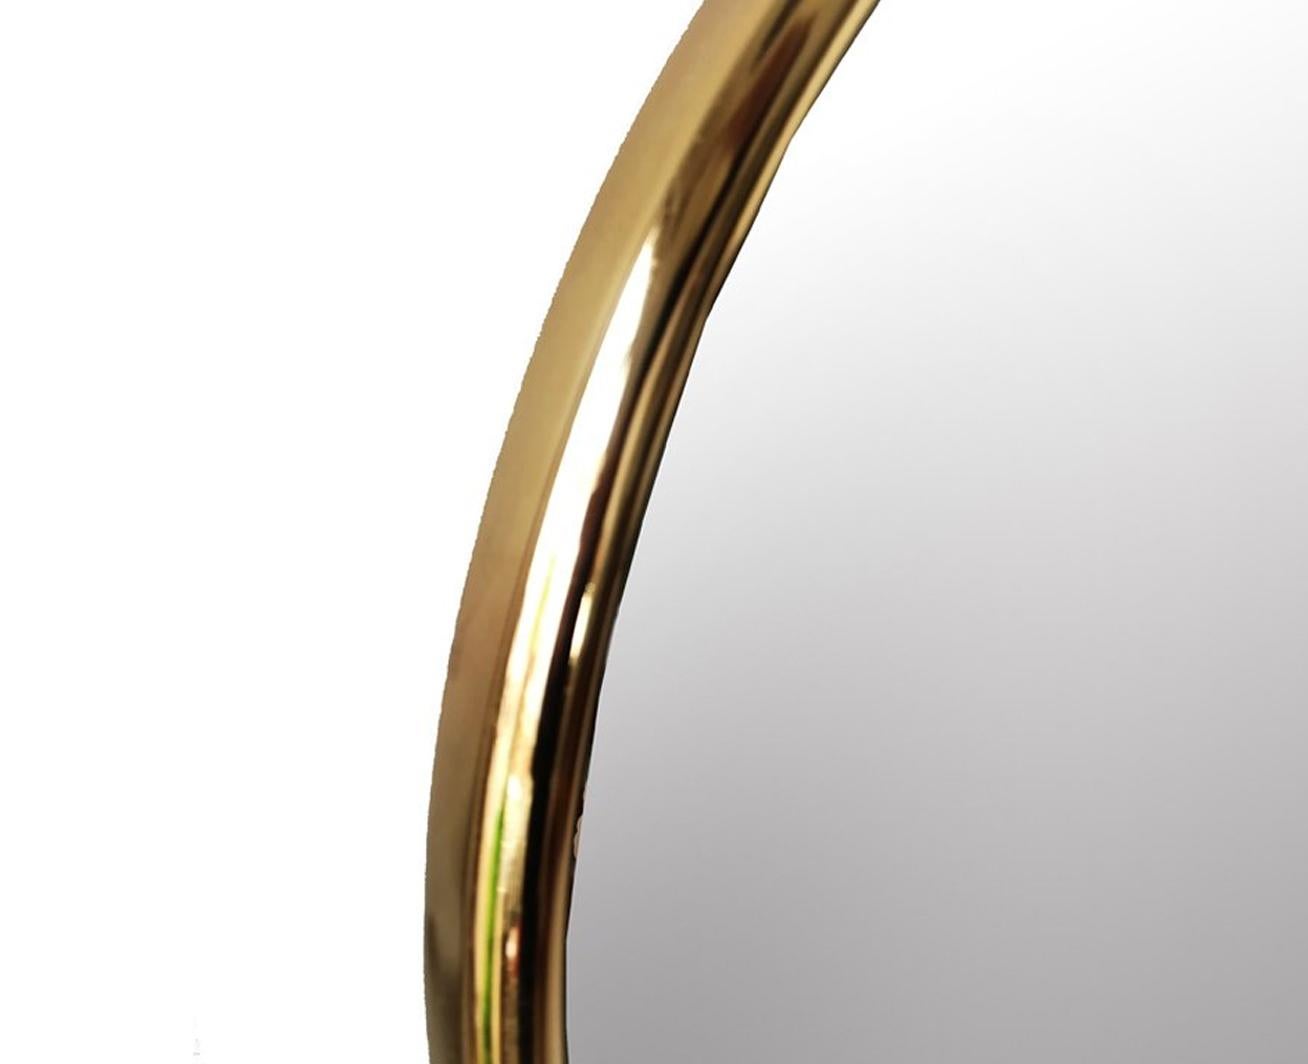   Mirror Gold Steel or Brass  Minimalist for bathroom Beveled , Mid-Century  For Sale 1